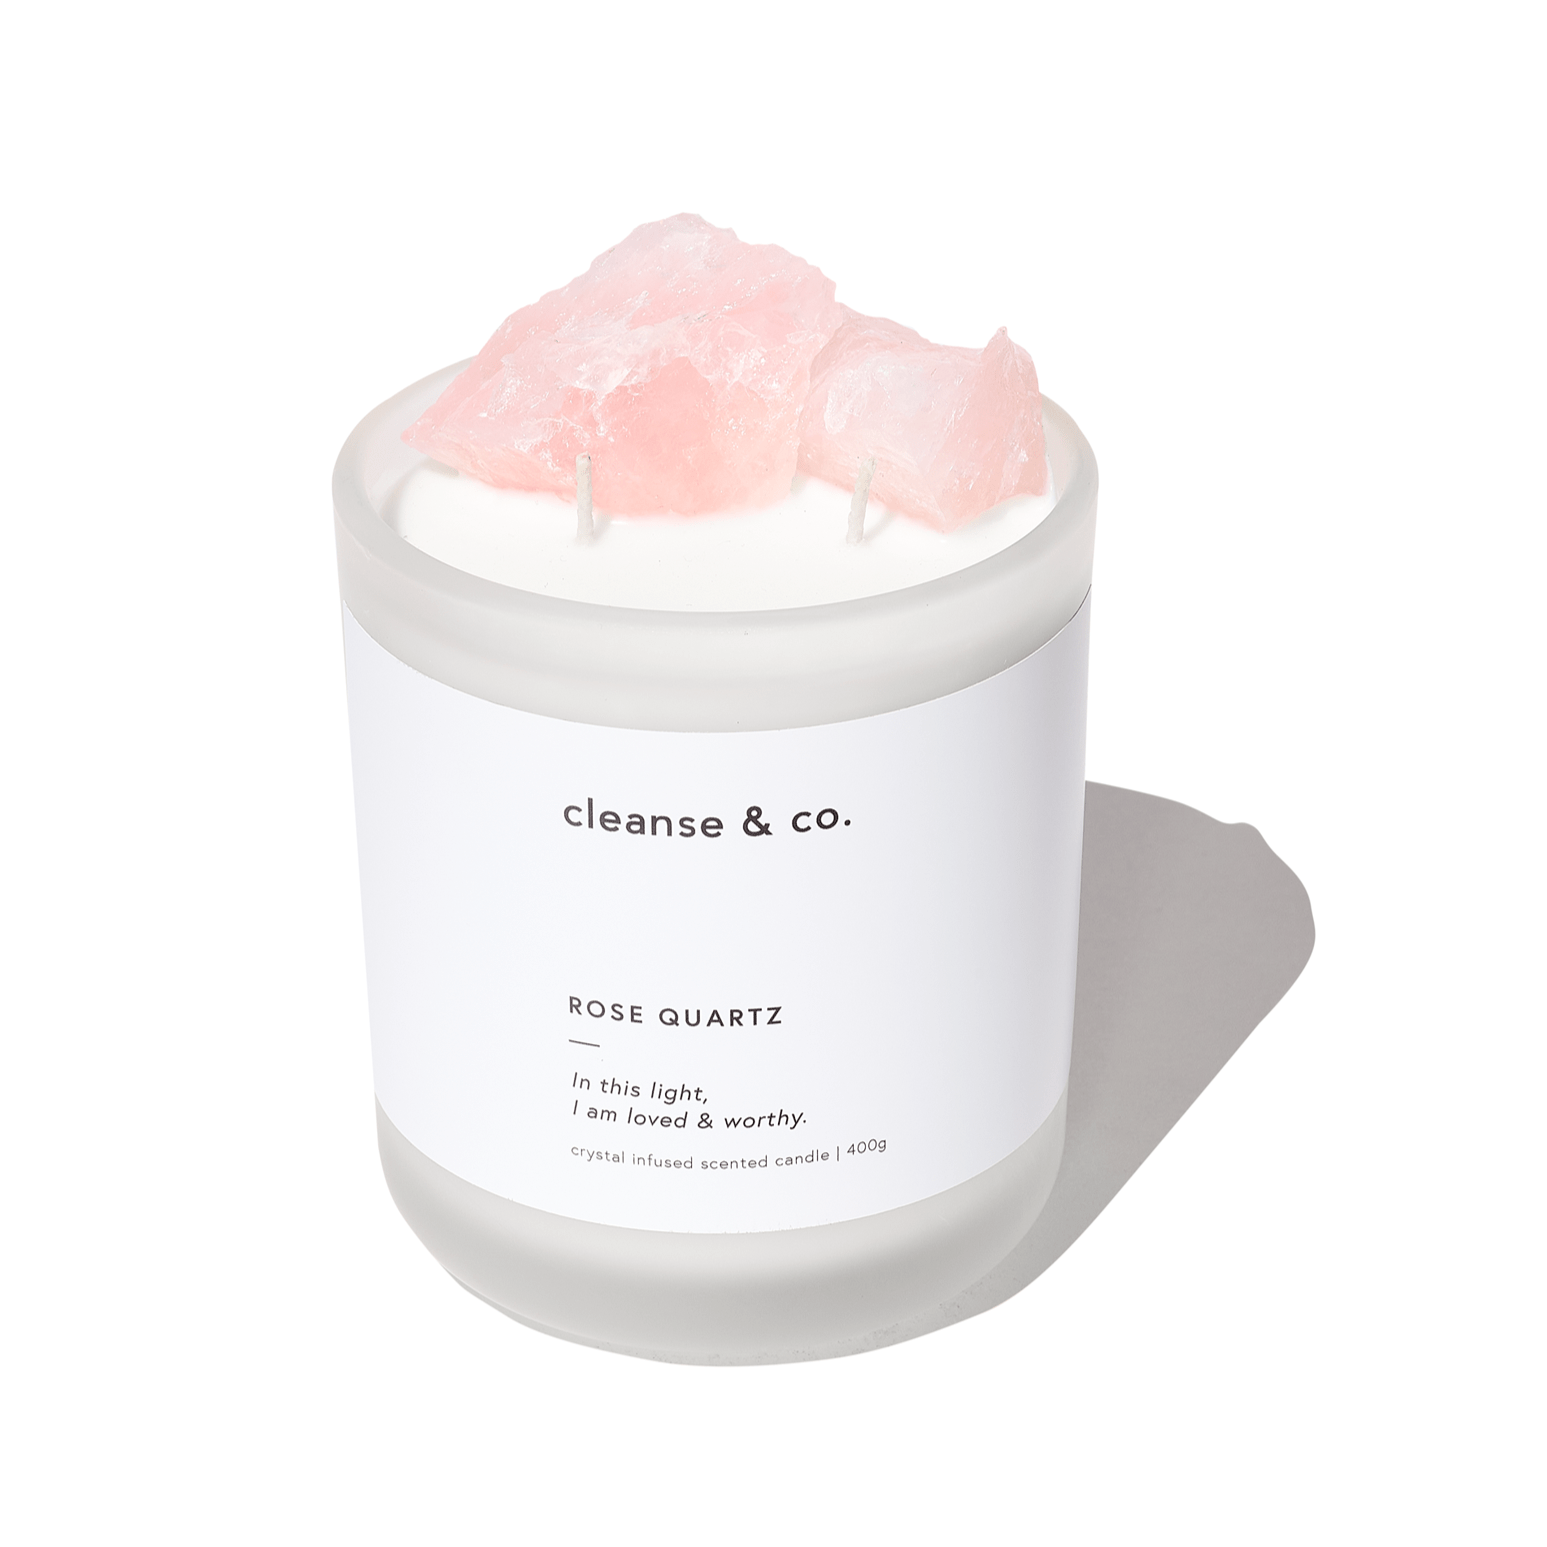 rose quartz crystal candle 400g by Cleanse & co